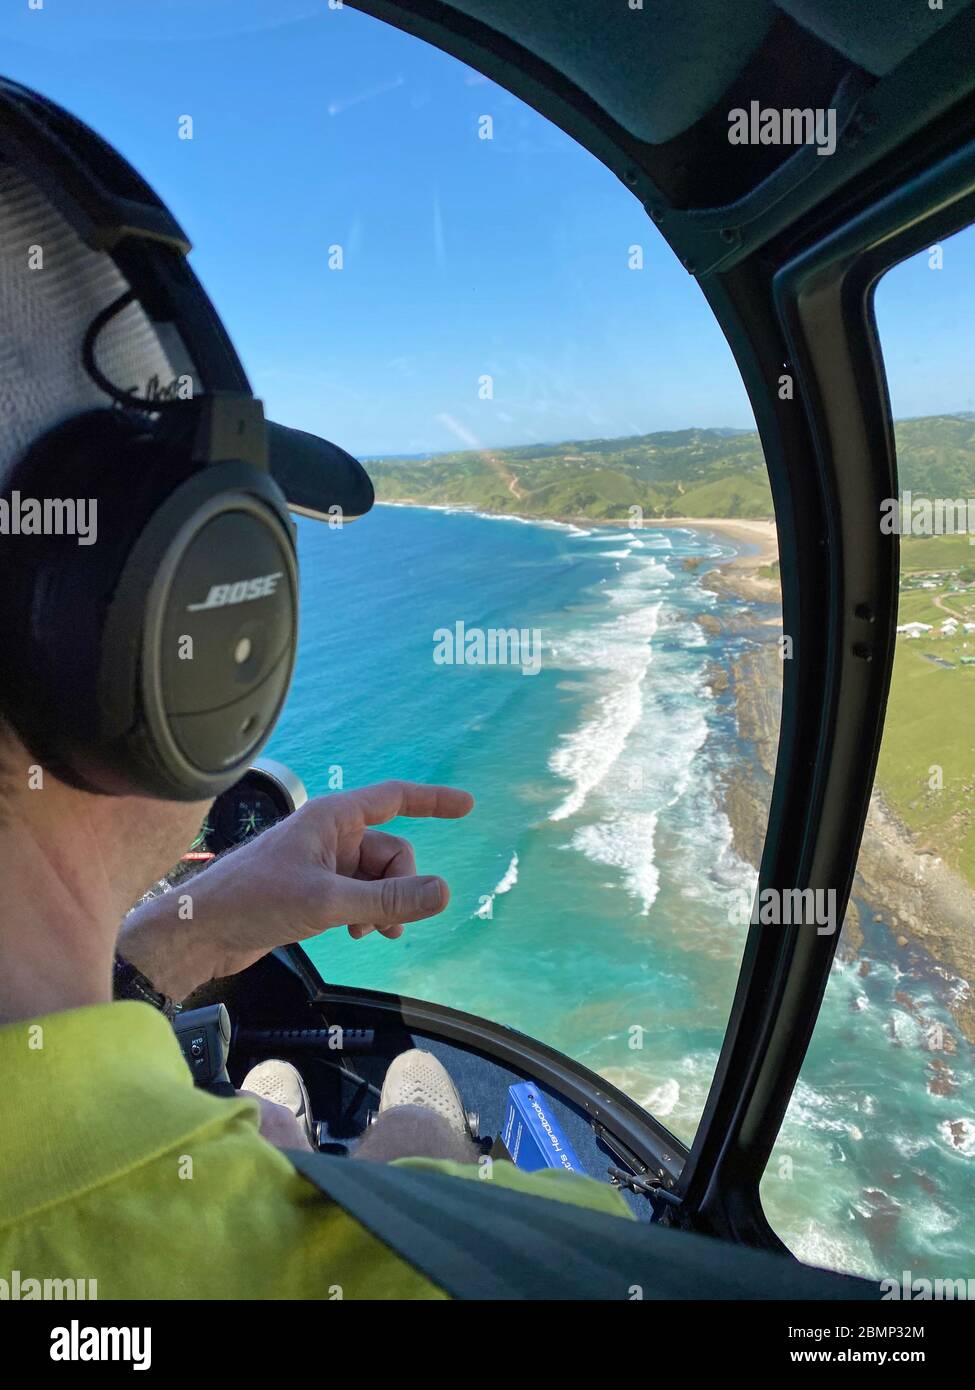 The helicopter pilot has spotted a group of dolphins near the coast. He is indicating to his passengers where the wild animals are in the water. Stock Photo